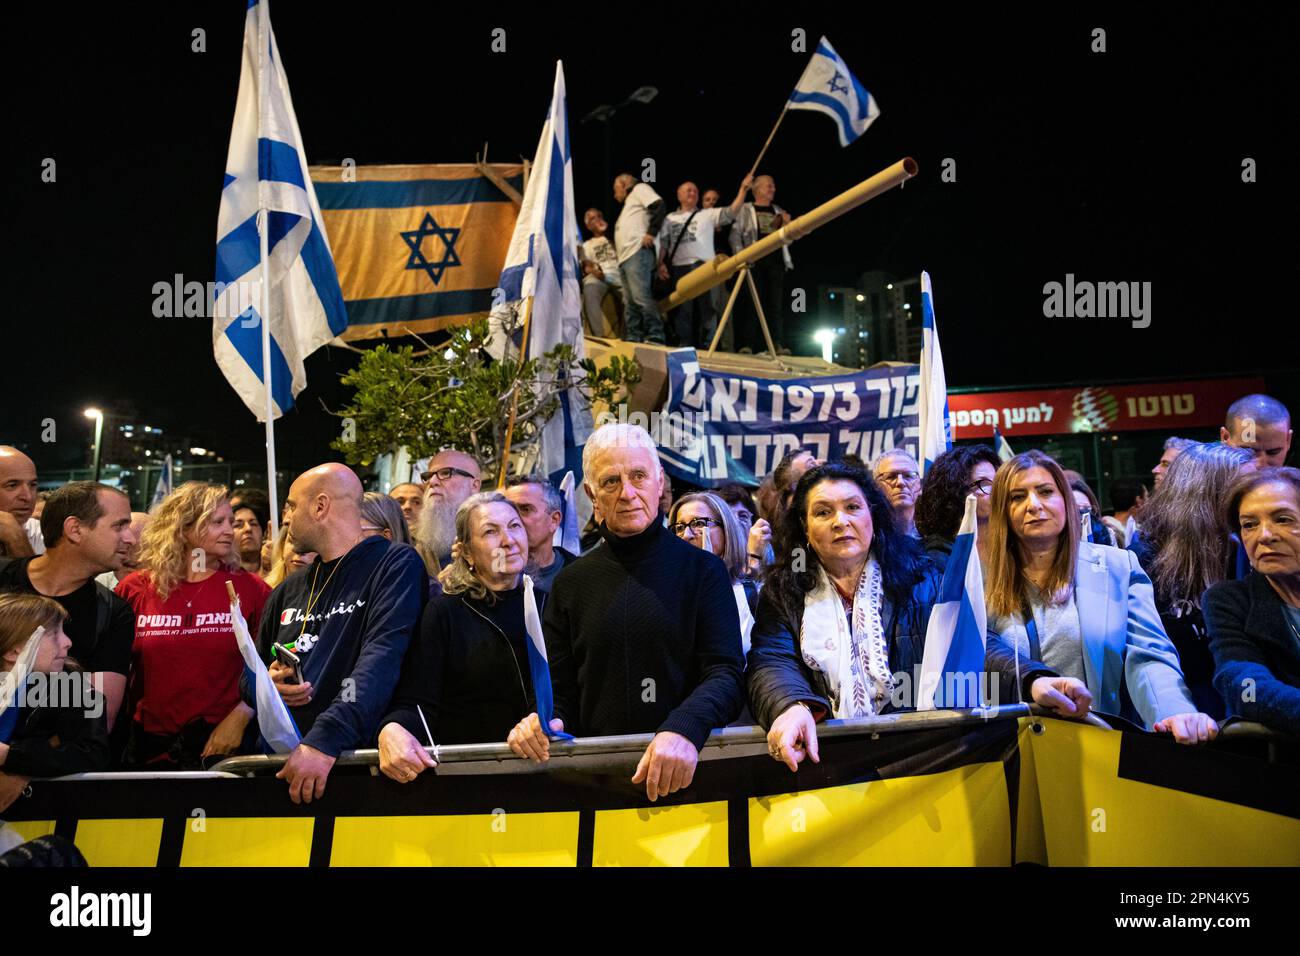 Israel. 15th Apr, 2023. Israeli protestors against the reform stand in front of a tank model brought by the warriors of the 73' Yom Kippur War as they wave an authentic old Israeli flag used at the battle in a protestation against the legal overhaul in Netanya. Apr 15th 2023. (Matan Golan/Sipa USA). Credit: Sipa USA/Alamy Live News Stock Photo